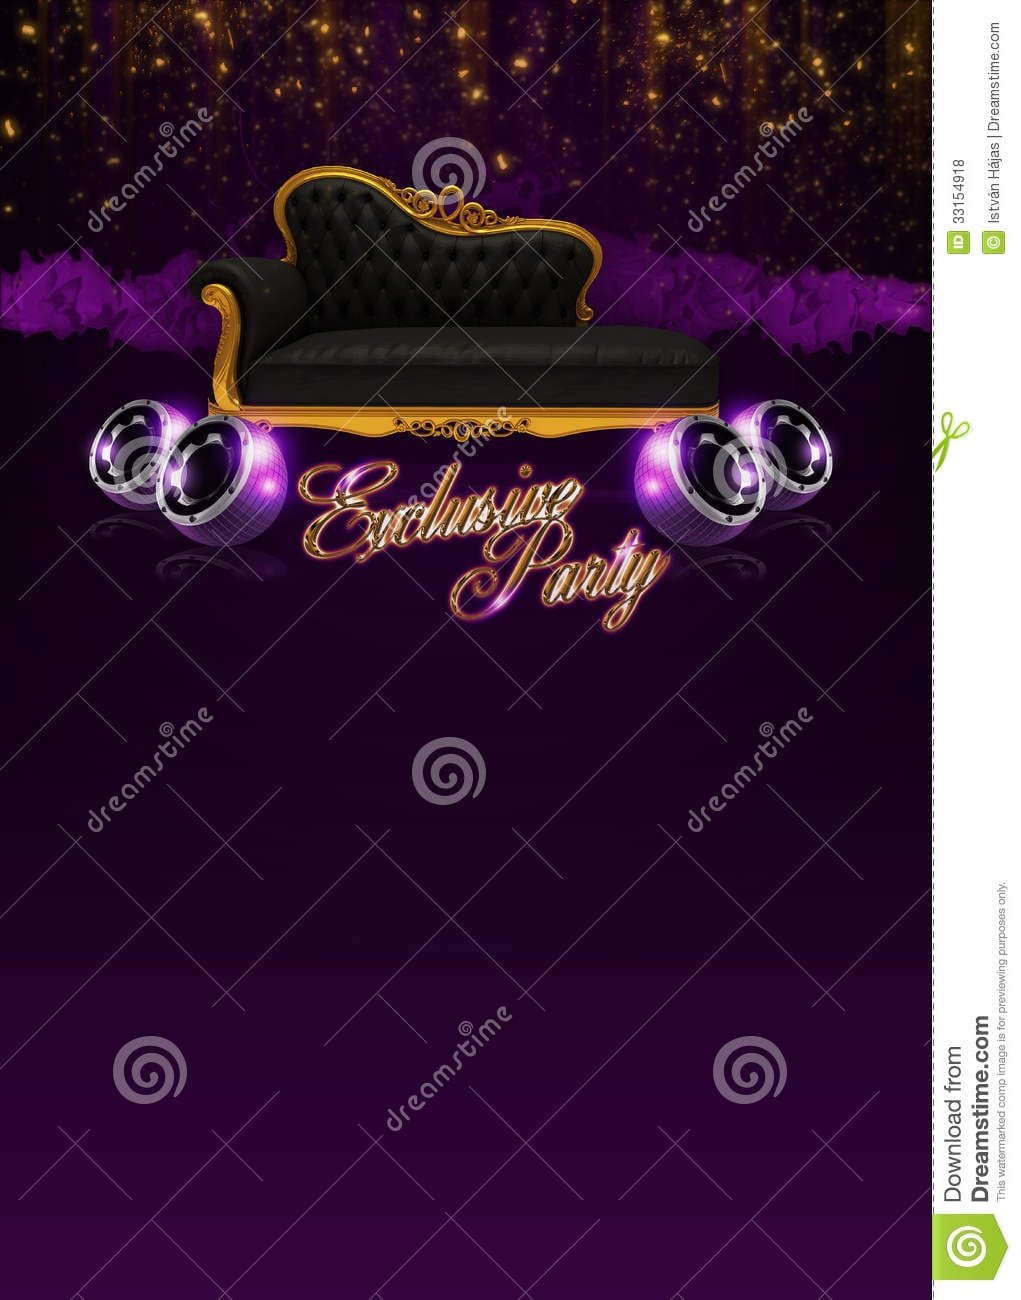 Exclusive Party Invitation Background Royalty Free Stock Photos